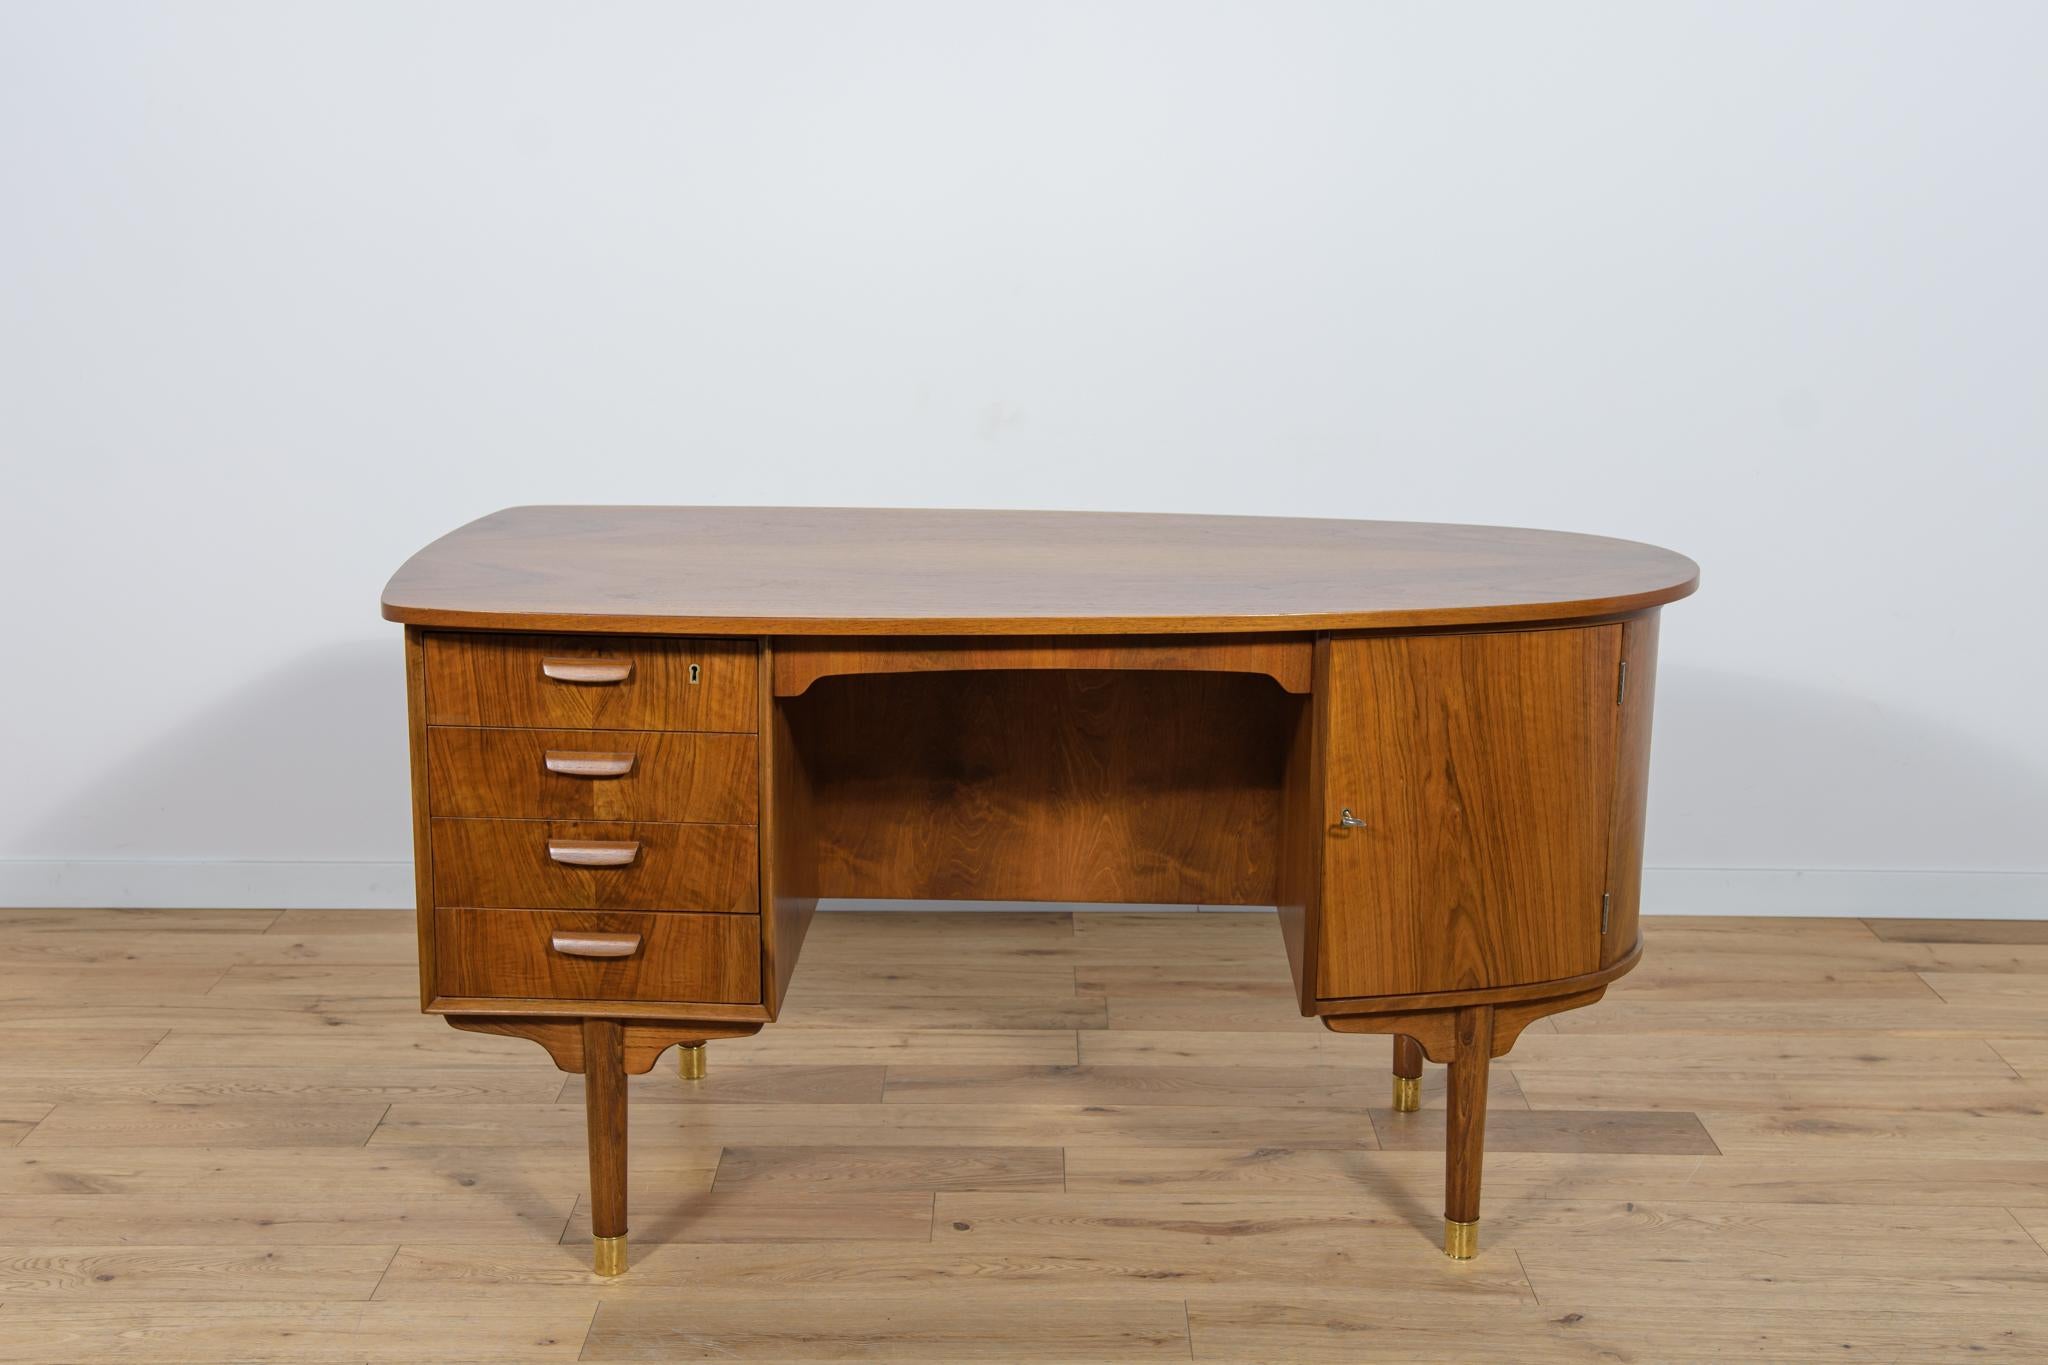 Freestanding desk made in Denmark in the 1960s in Mid Century style. It is made of walnut wood with profiled handles. The furniture has a unique rounded shape, giving it a unique character. It consists of two modules, on the left there are four